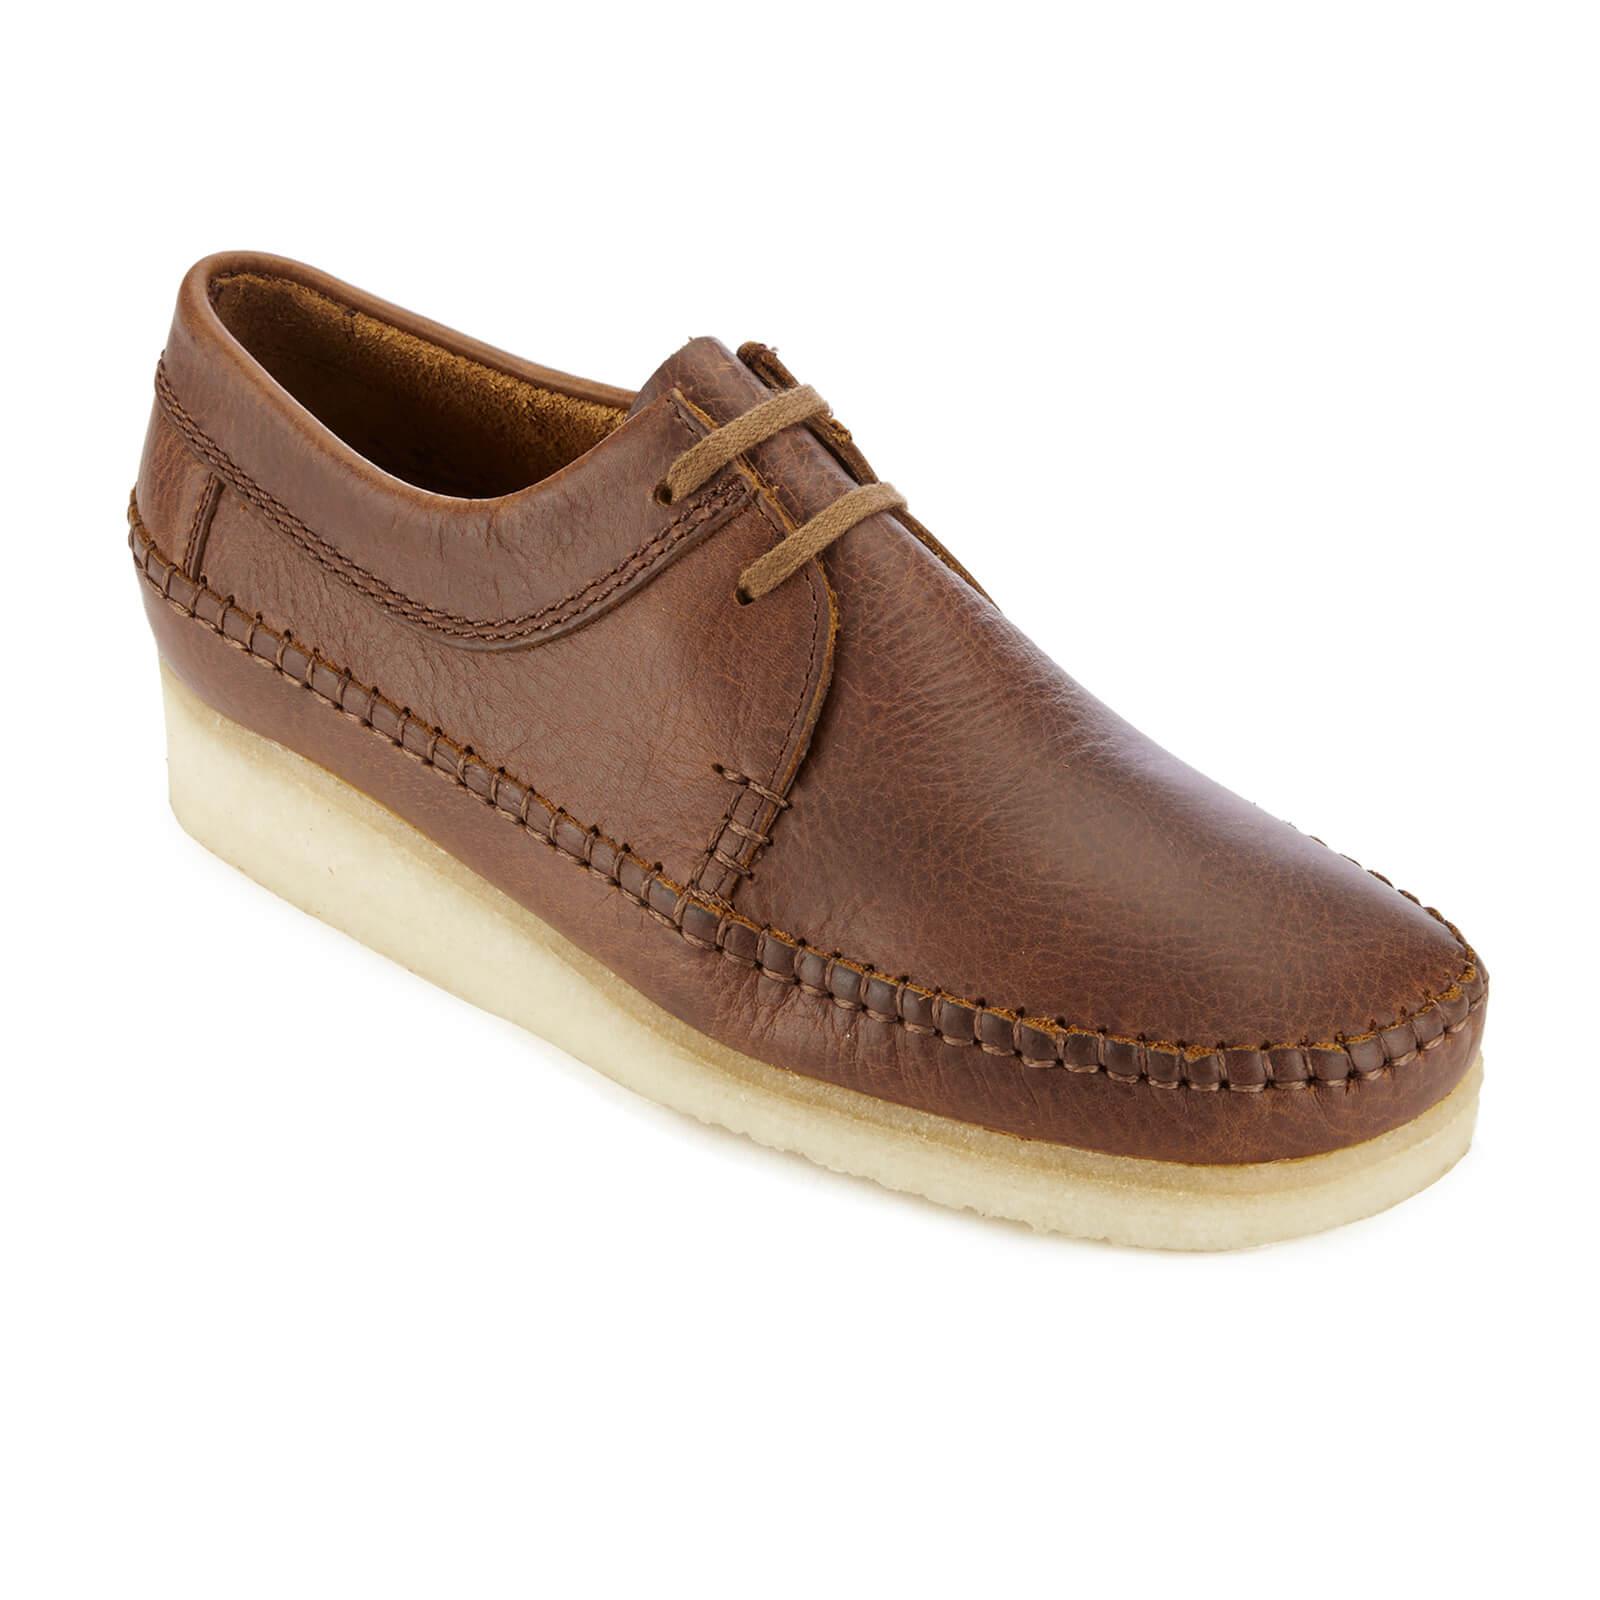 Clarks Leather Men's Weaver Shoes in Tan (Brown) for Men - Lyst